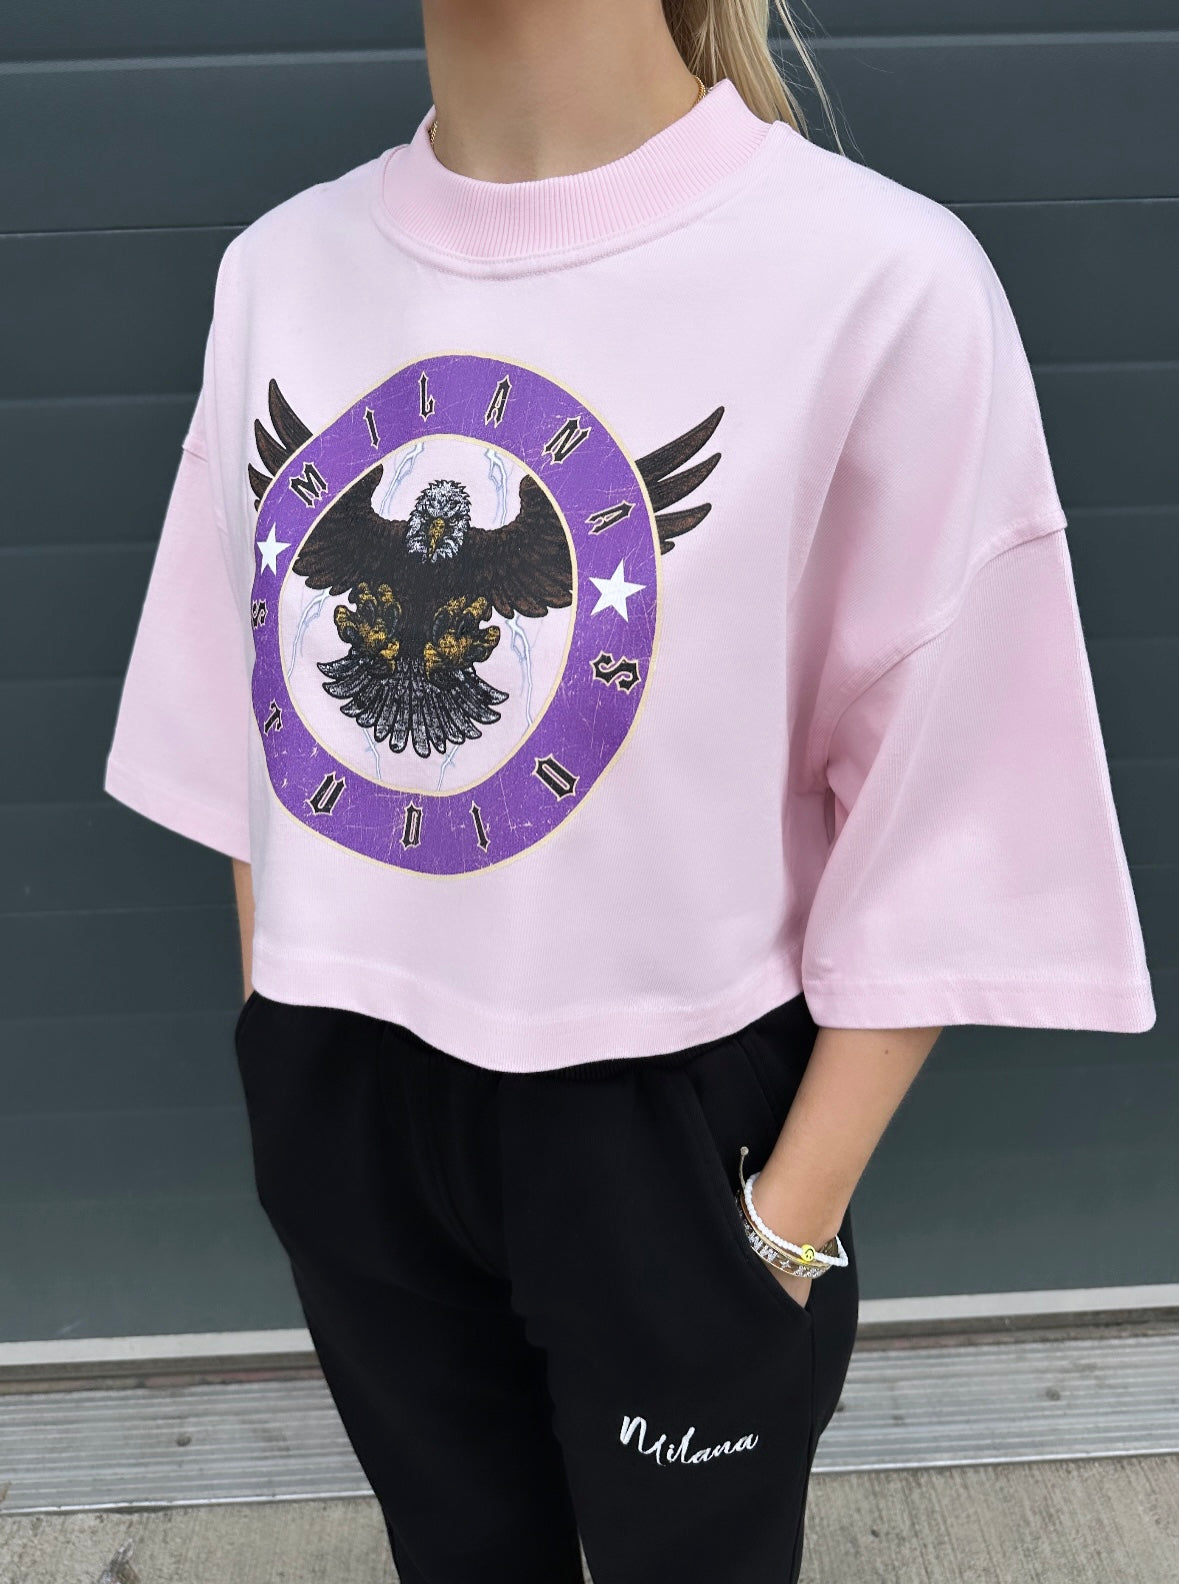 Pink Eagle Cropped Heavyweight T-shirt.